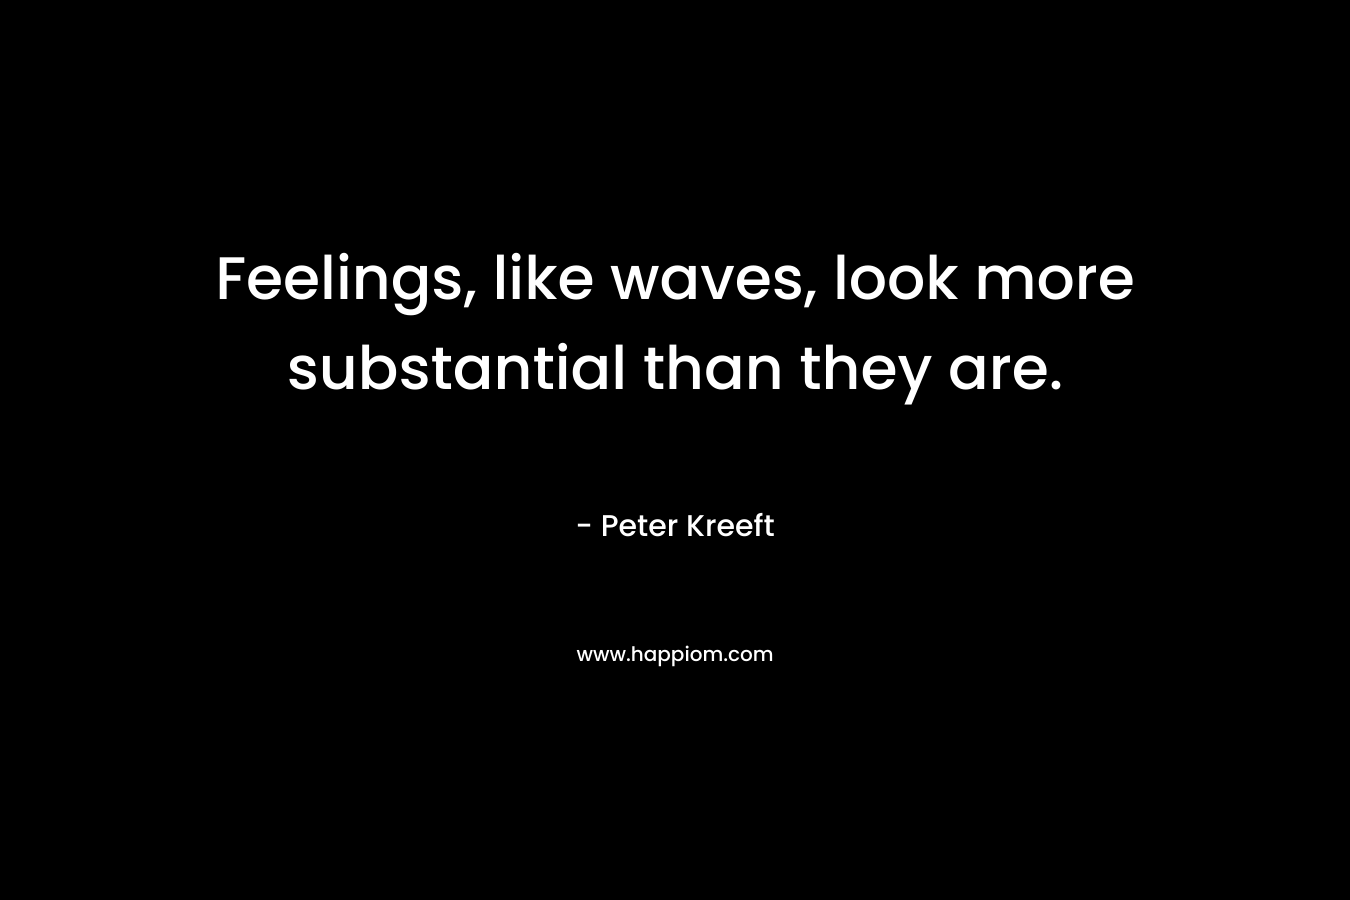 Feelings, like waves, look more substantial than they are.